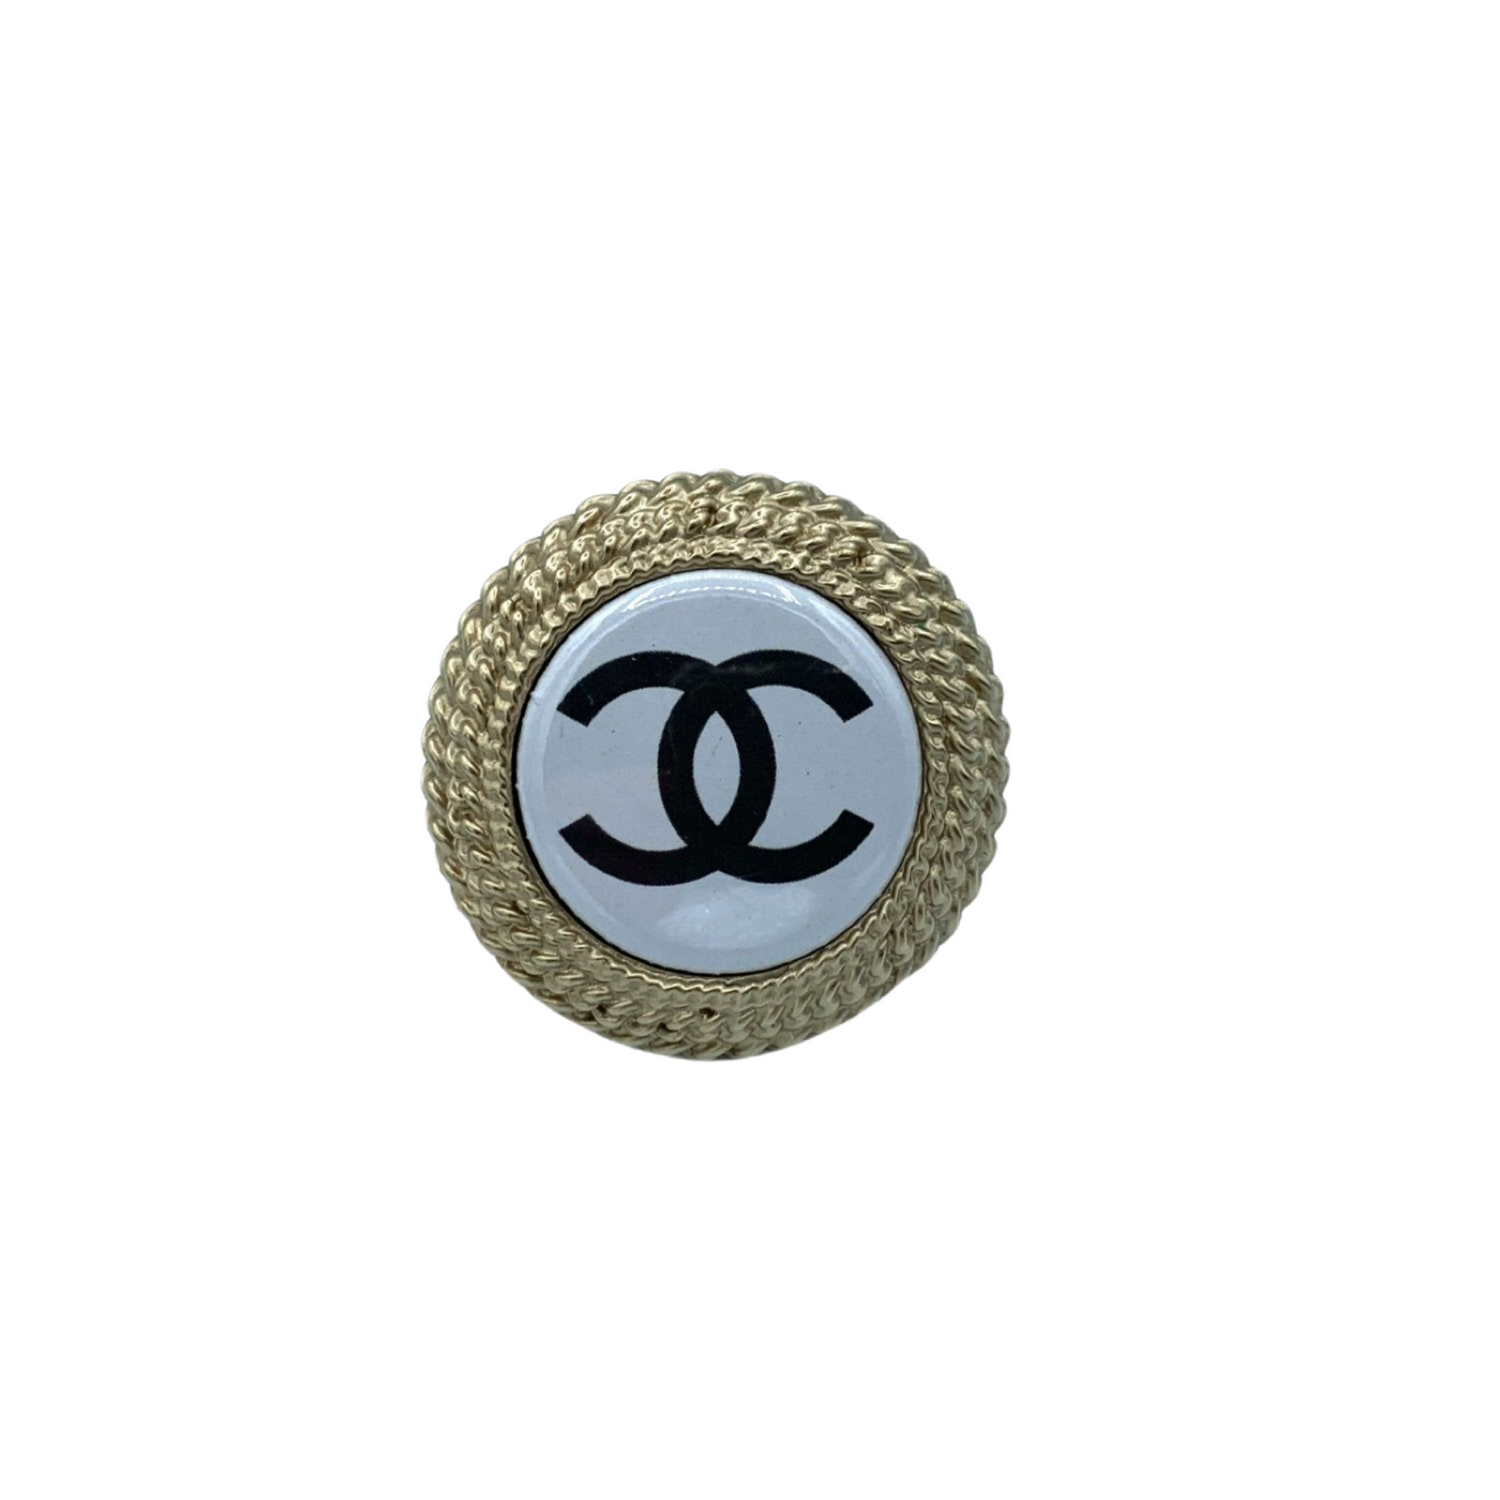 Vintage Authentic Chanel Button Made into Ring  Grailed  Vintage chanel  jewelry Chanel jewelry Vintage jewelry